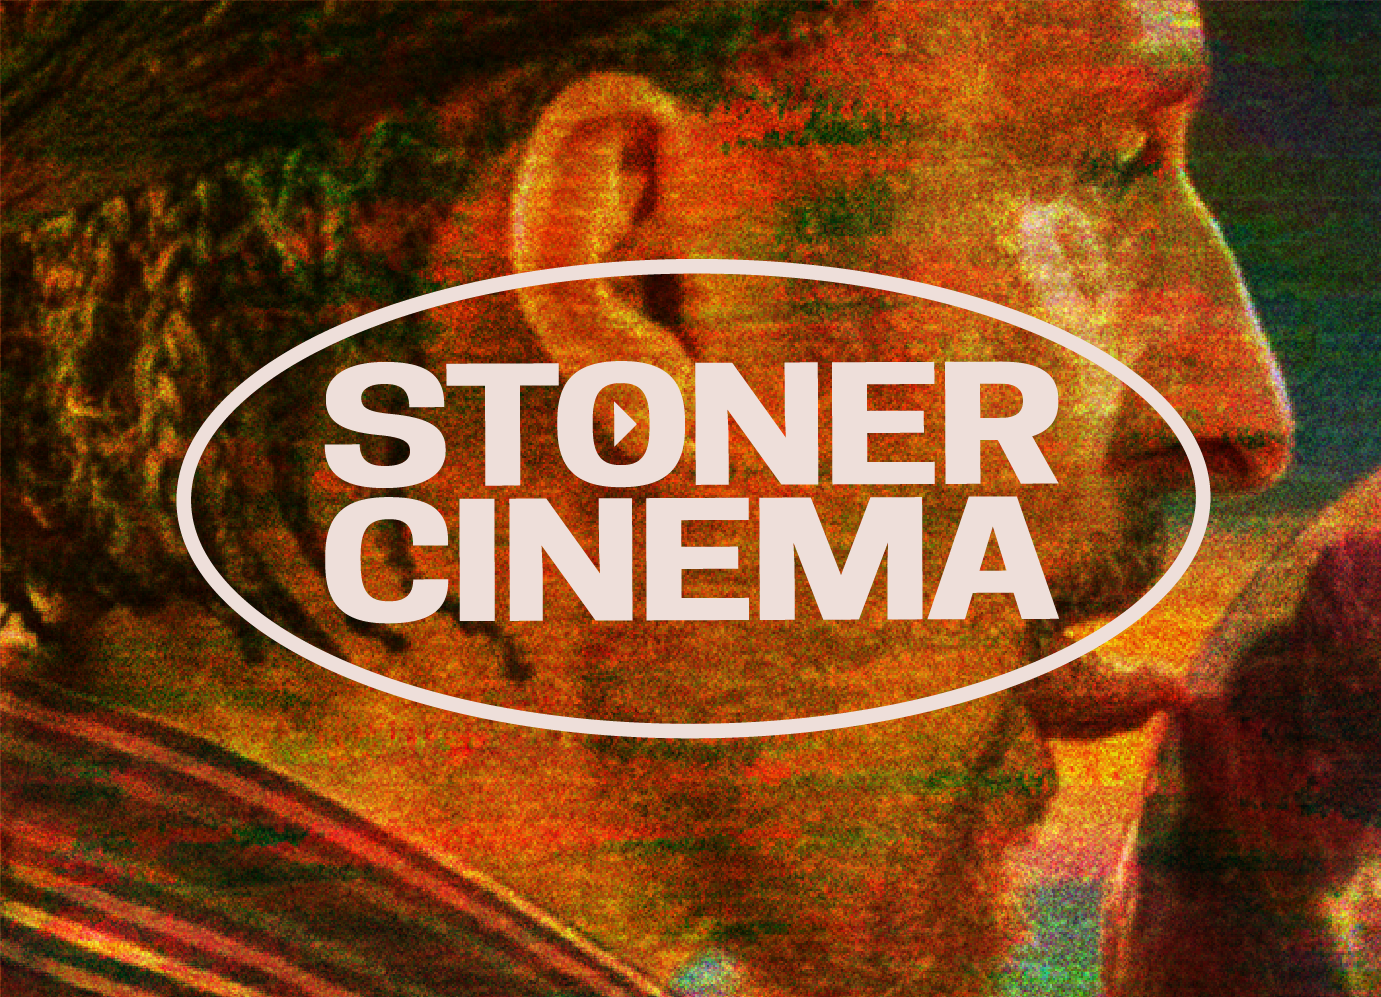 a poster for stoner cinema shows a man in a striped shirt